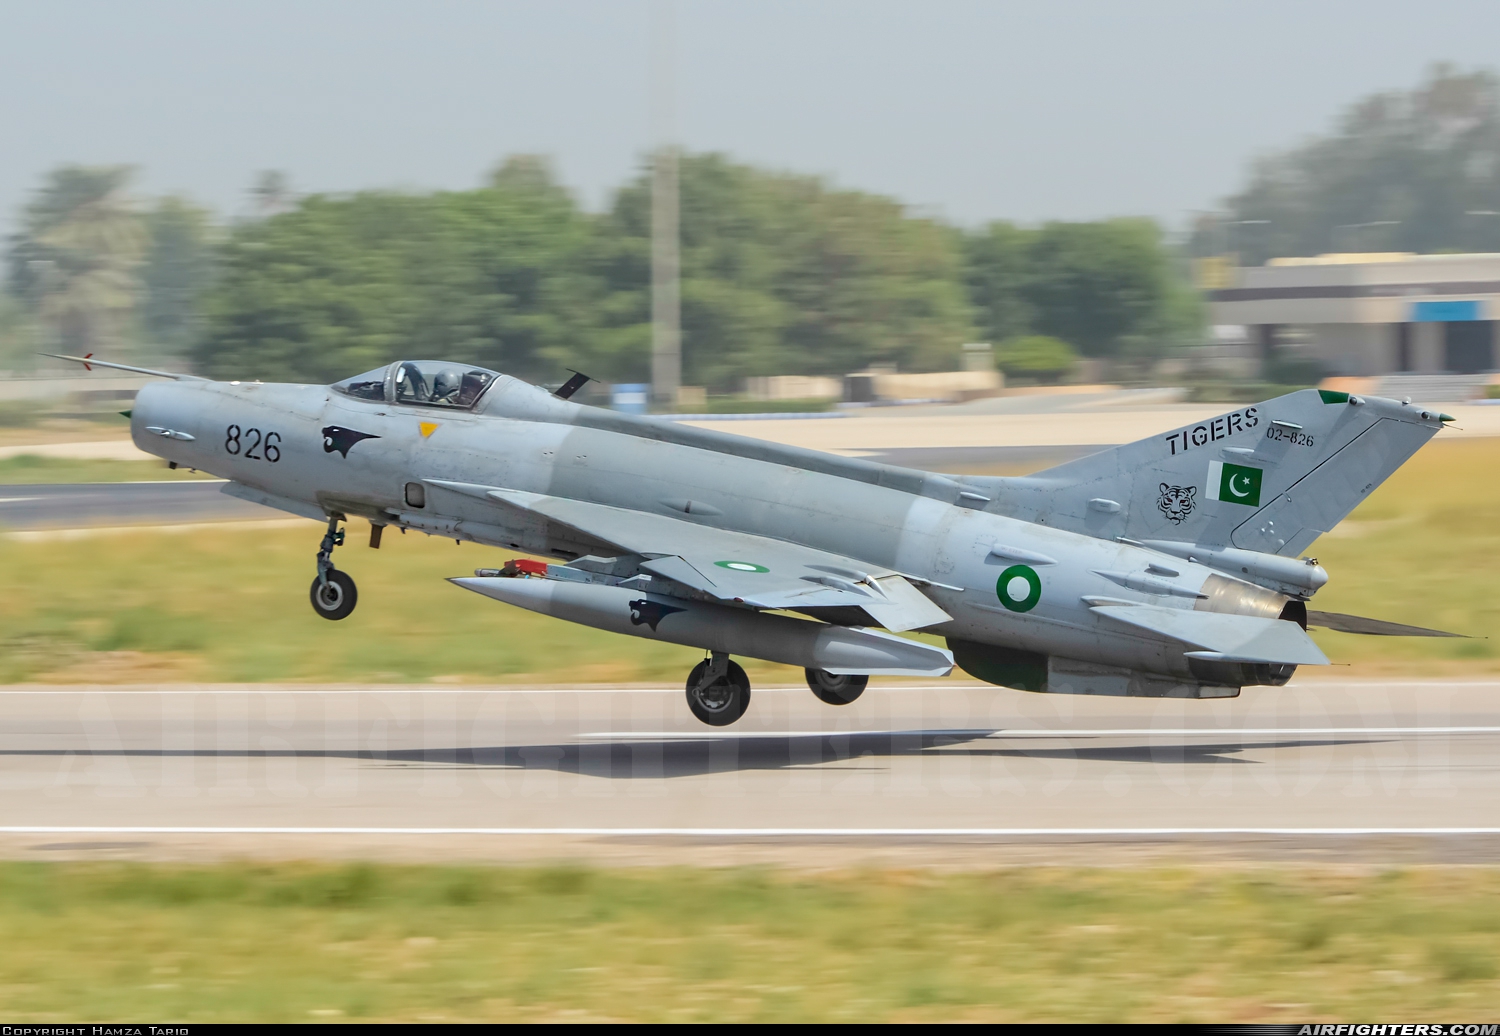 Pakistan - Air Force Chengdu F-7PG 02-826 at Withheld, Pakistan